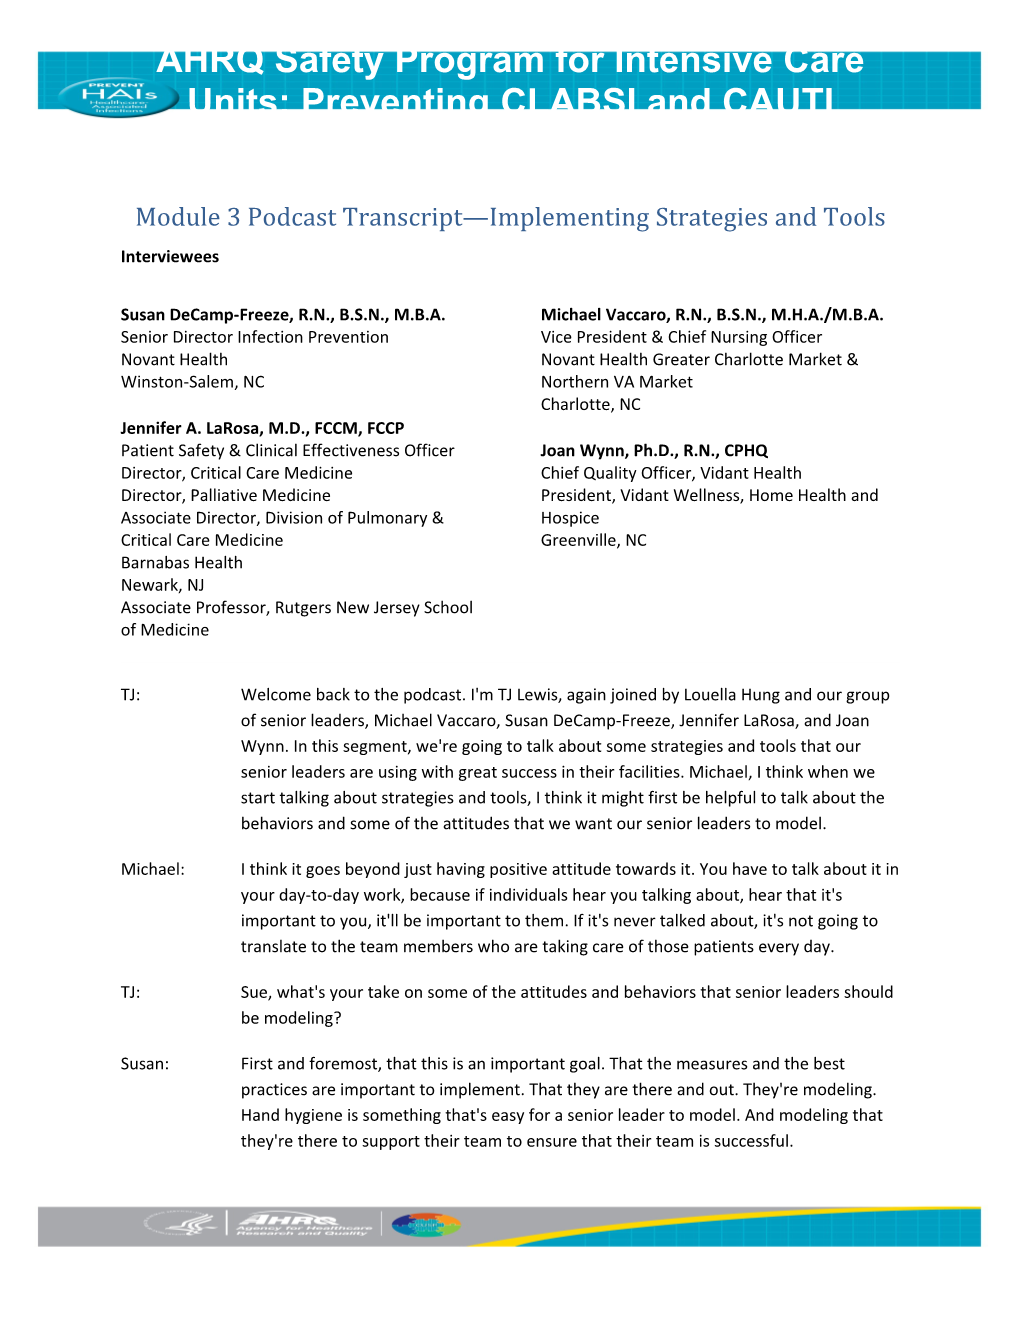 Module 3 Podcast Transcript Implementing Strategies and Tools